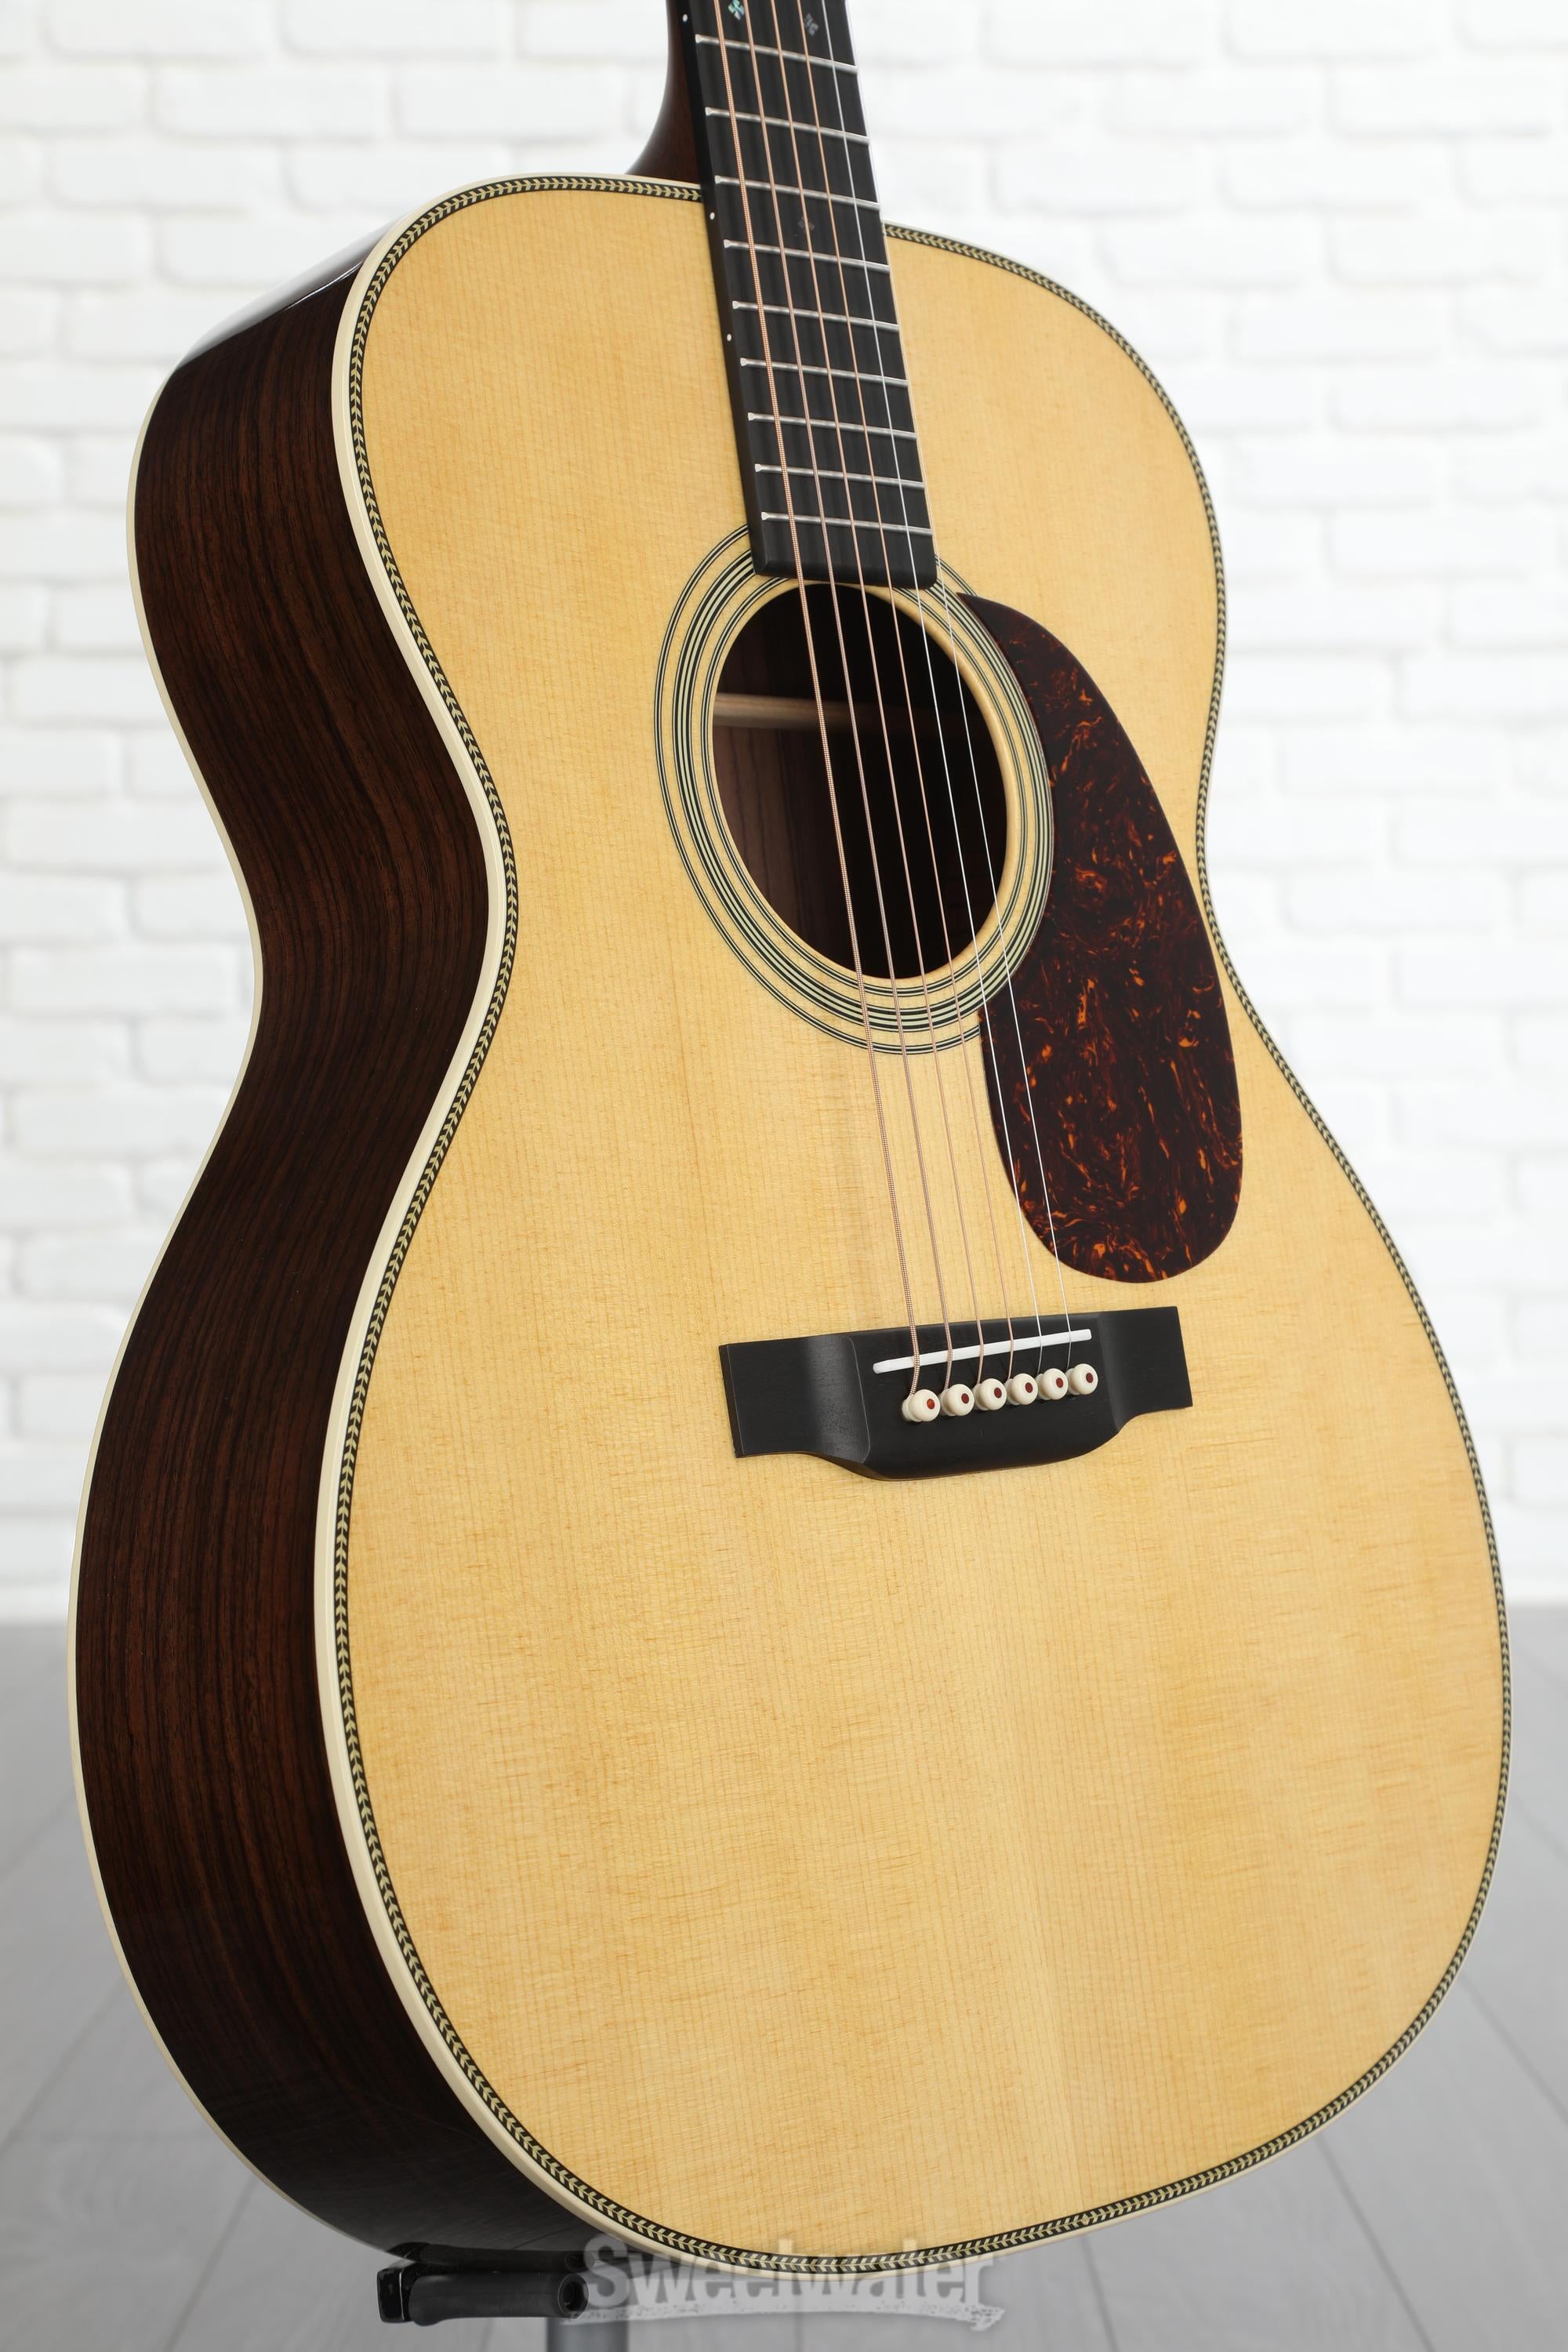 Martin 000-28 Acoustic Guitar - Natural | Sweetwater